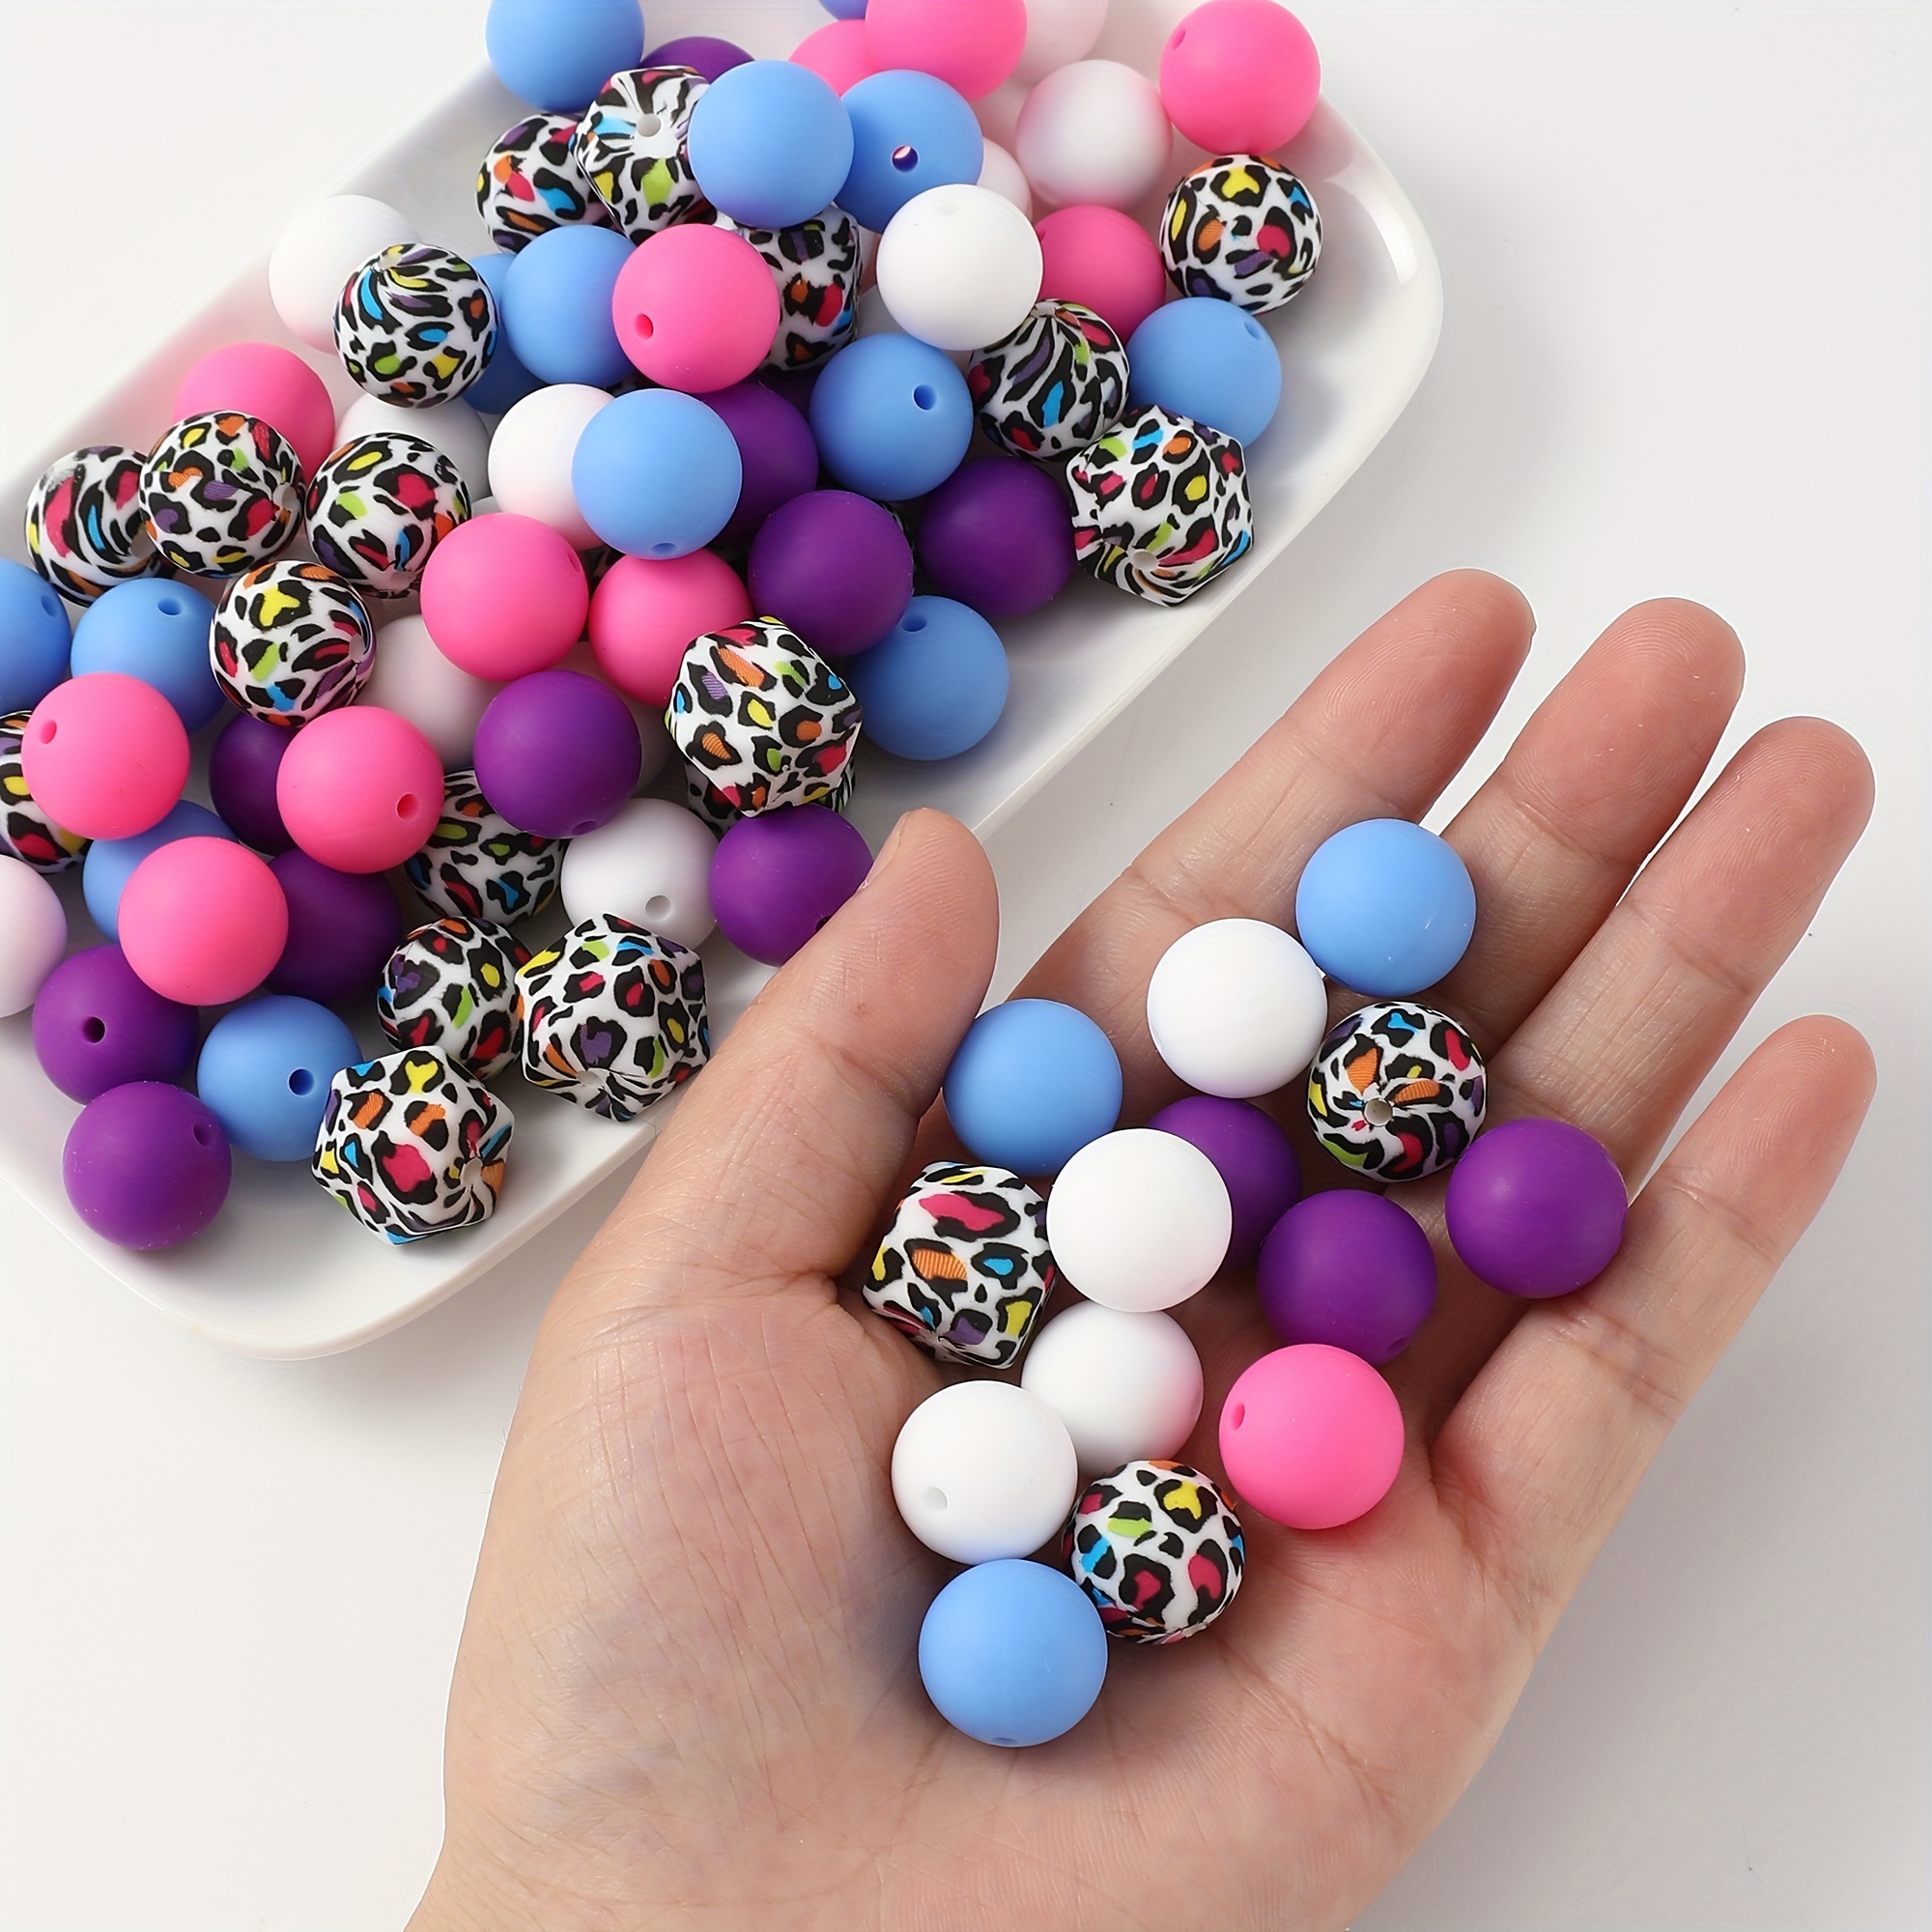 

50pcs Silica Gel Beads 15mm Leopard Silica Gel Hexagonal Beads Loose Round Silica Gel Beads Keychains, Pens, Lanyards, Bracelets, Necklaces, Jewelry Making Diy Craft Accessories